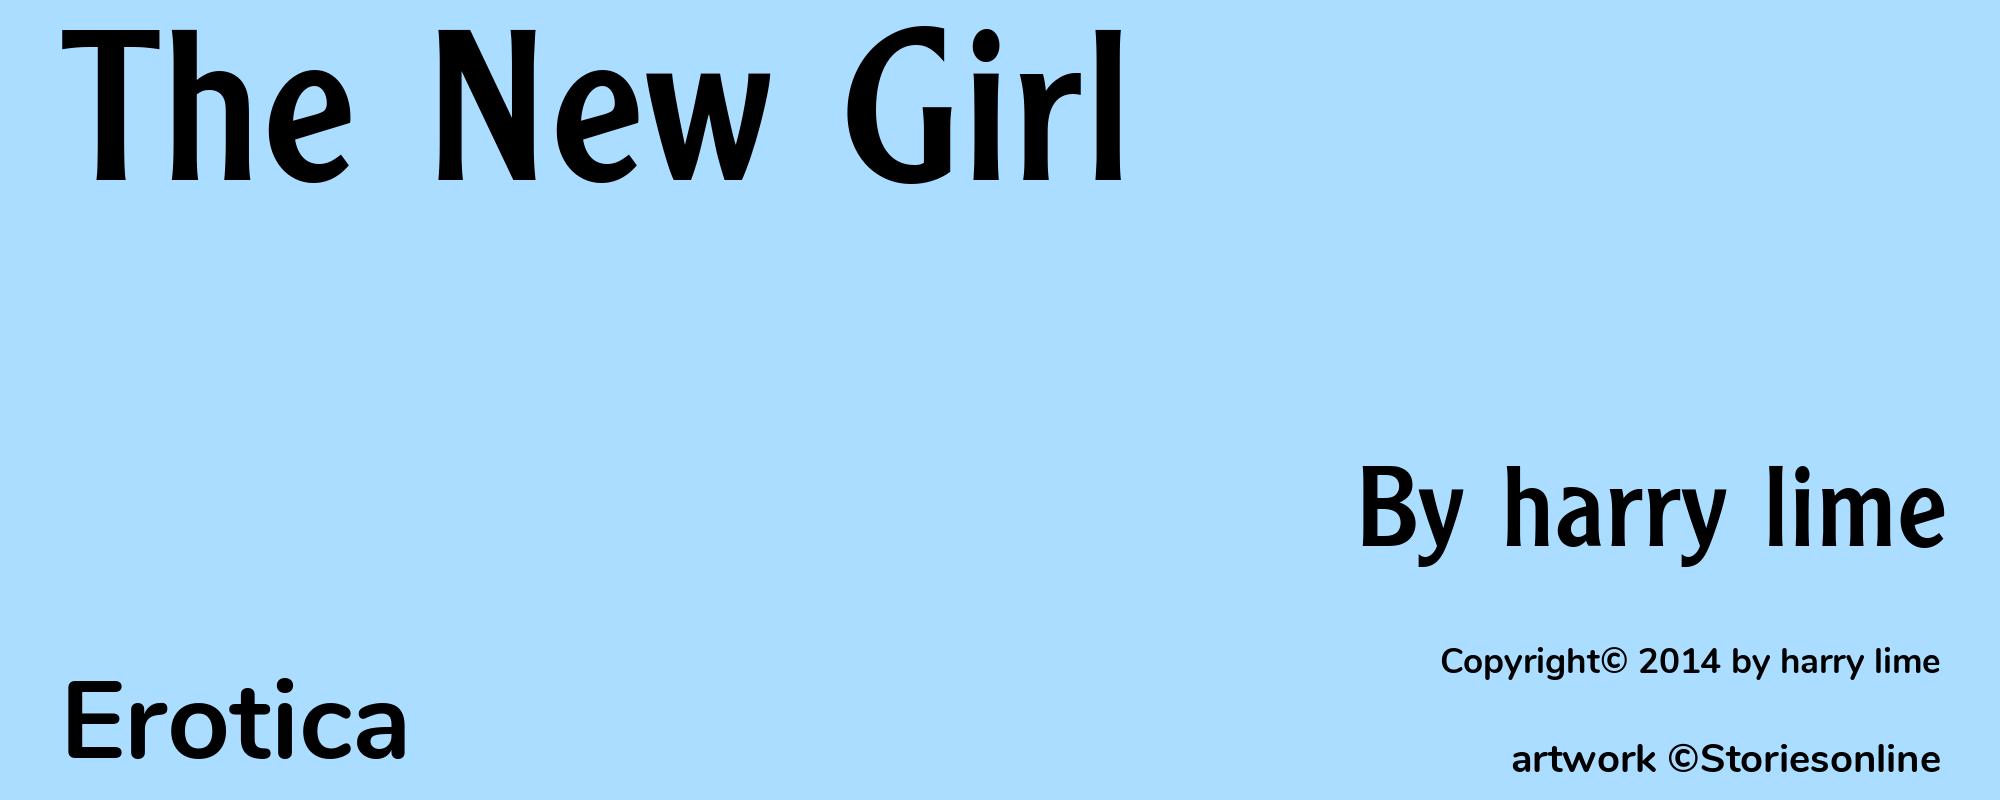 The New Girl - Cover